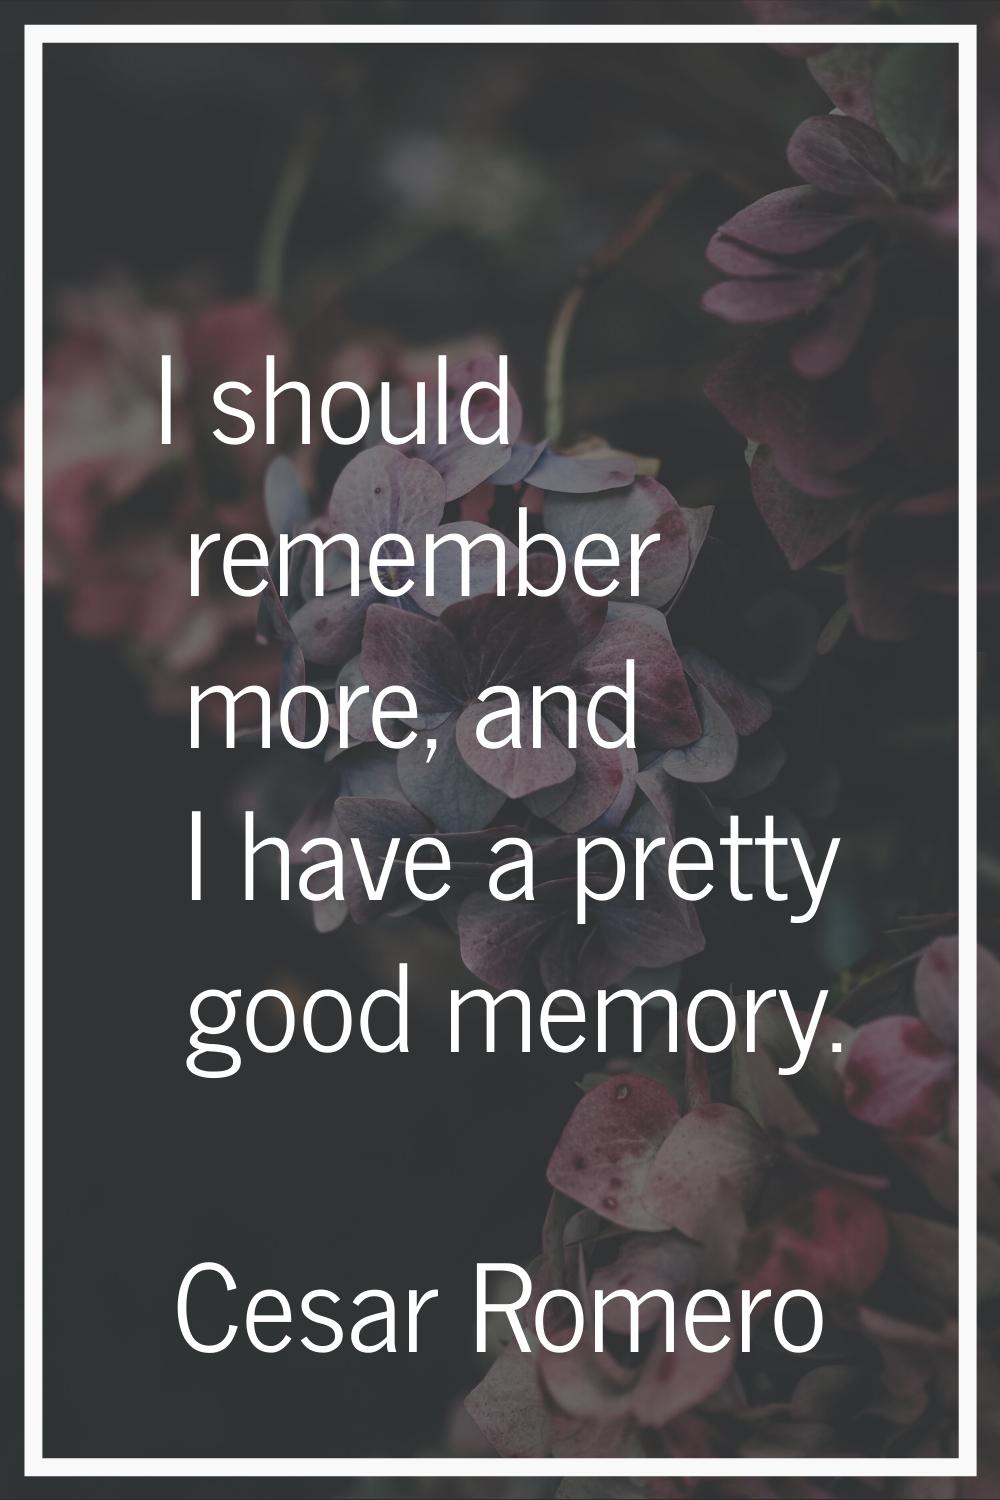 I should remember more, and I have a pretty good memory.